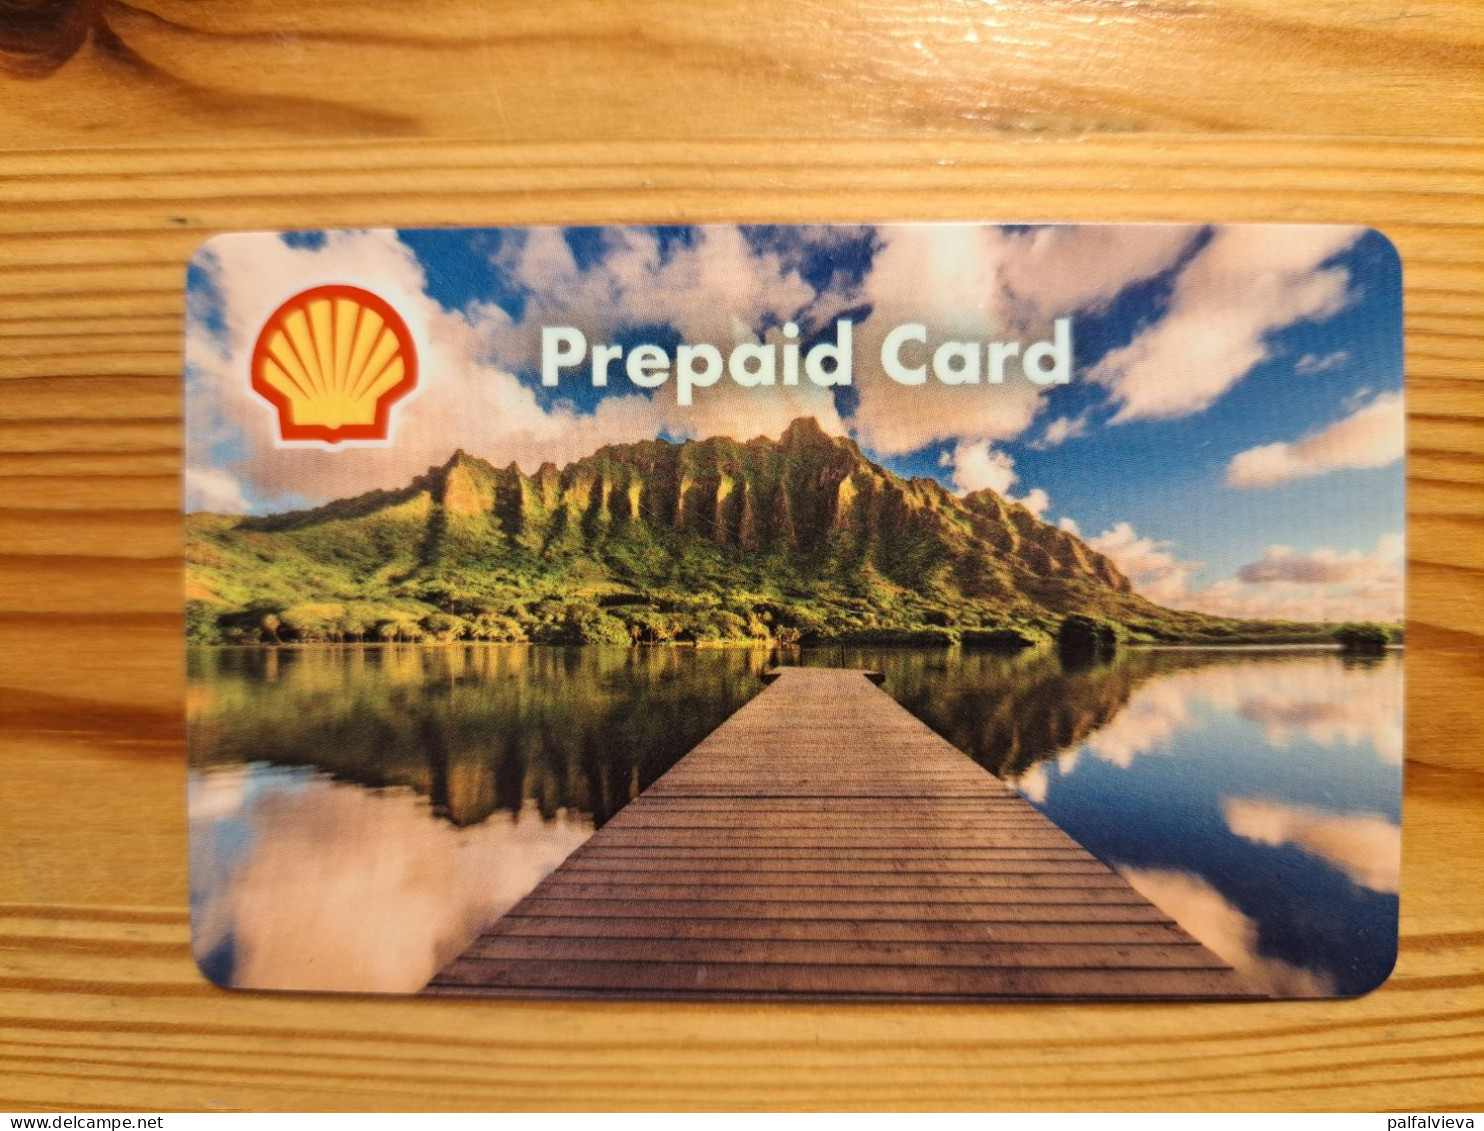 Shell Gift Card Germany - Gift Cards